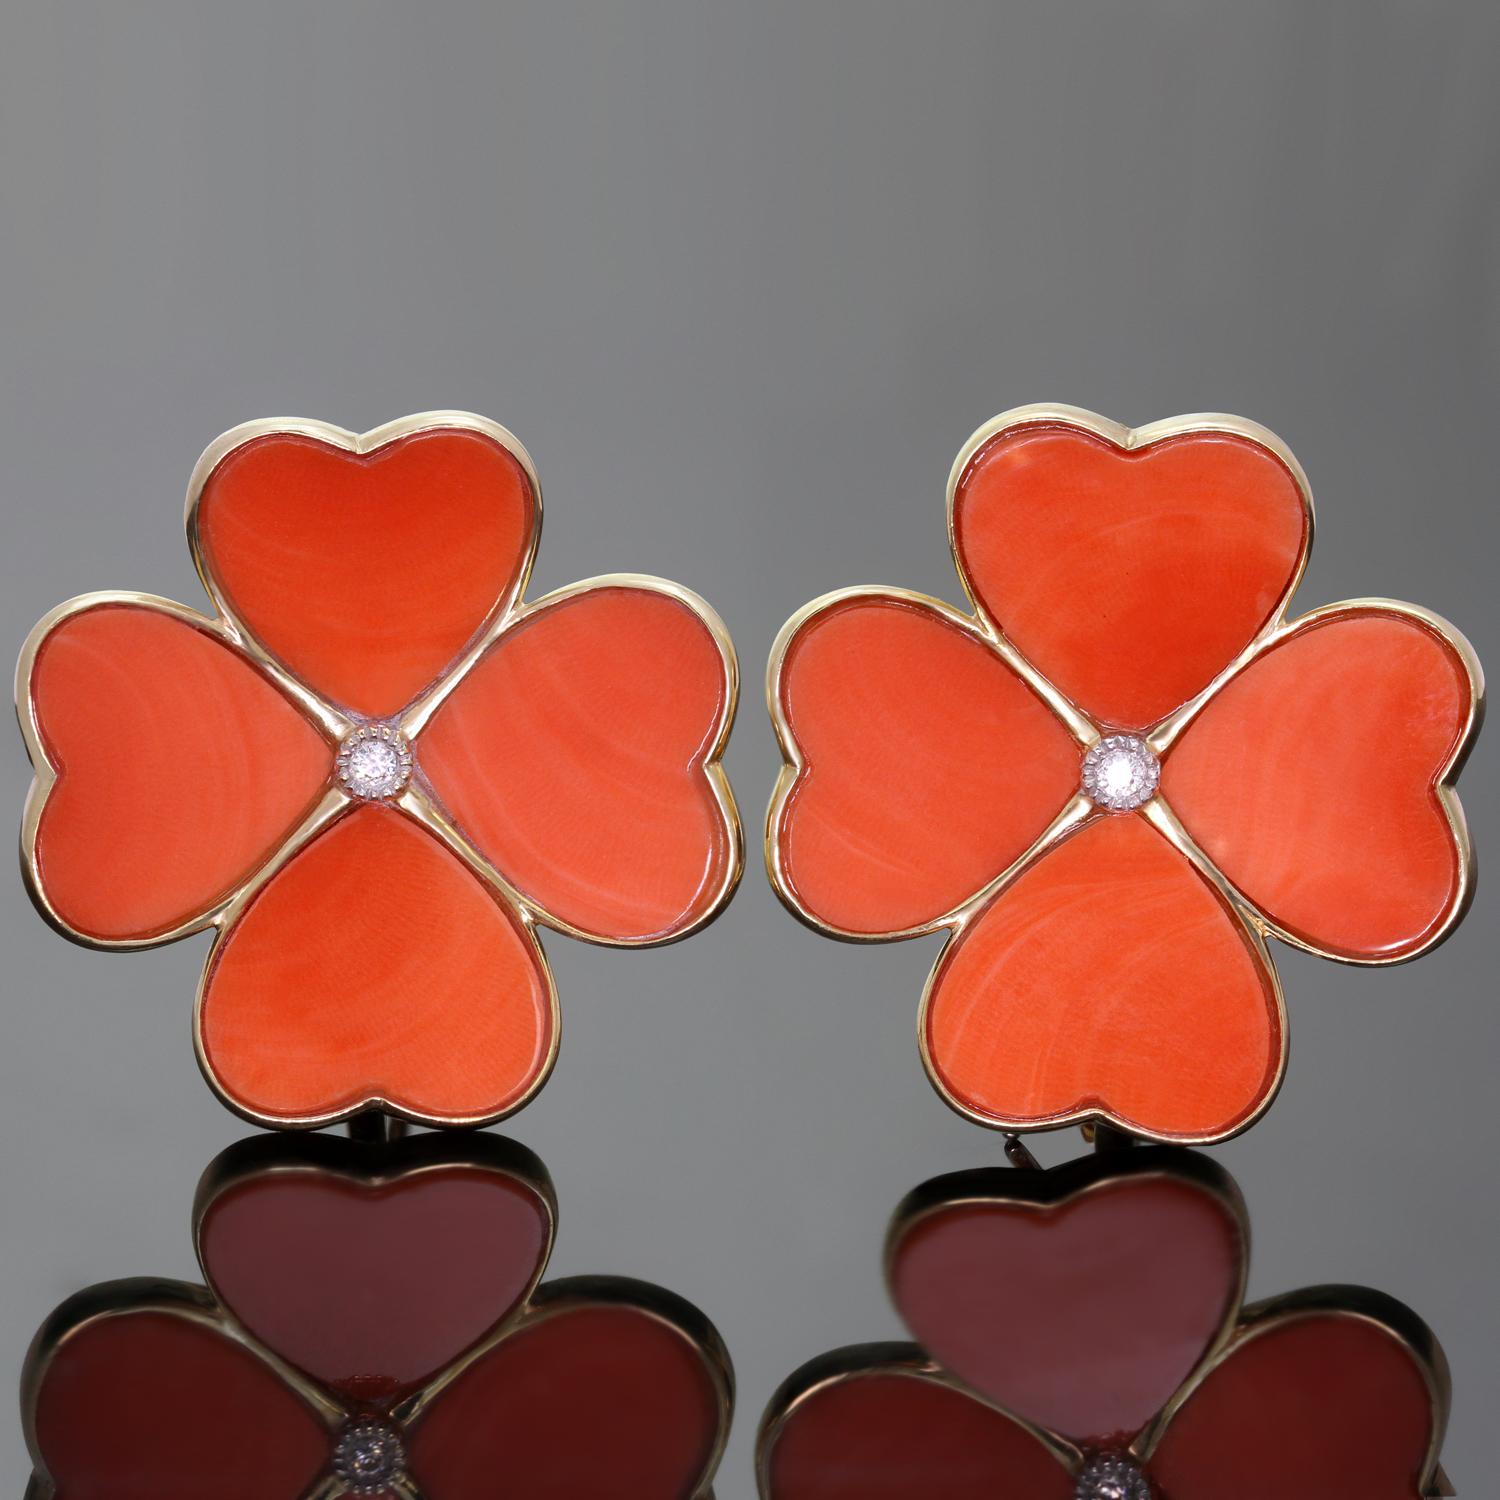 These classic timeless earrings feature a large clover flower design crafted in 18k yellow gold and set with 4 natural red coral petals and a solitaire brilliant-cut round diamond of an estimated 0.10 carats. Completed with lever-backs and